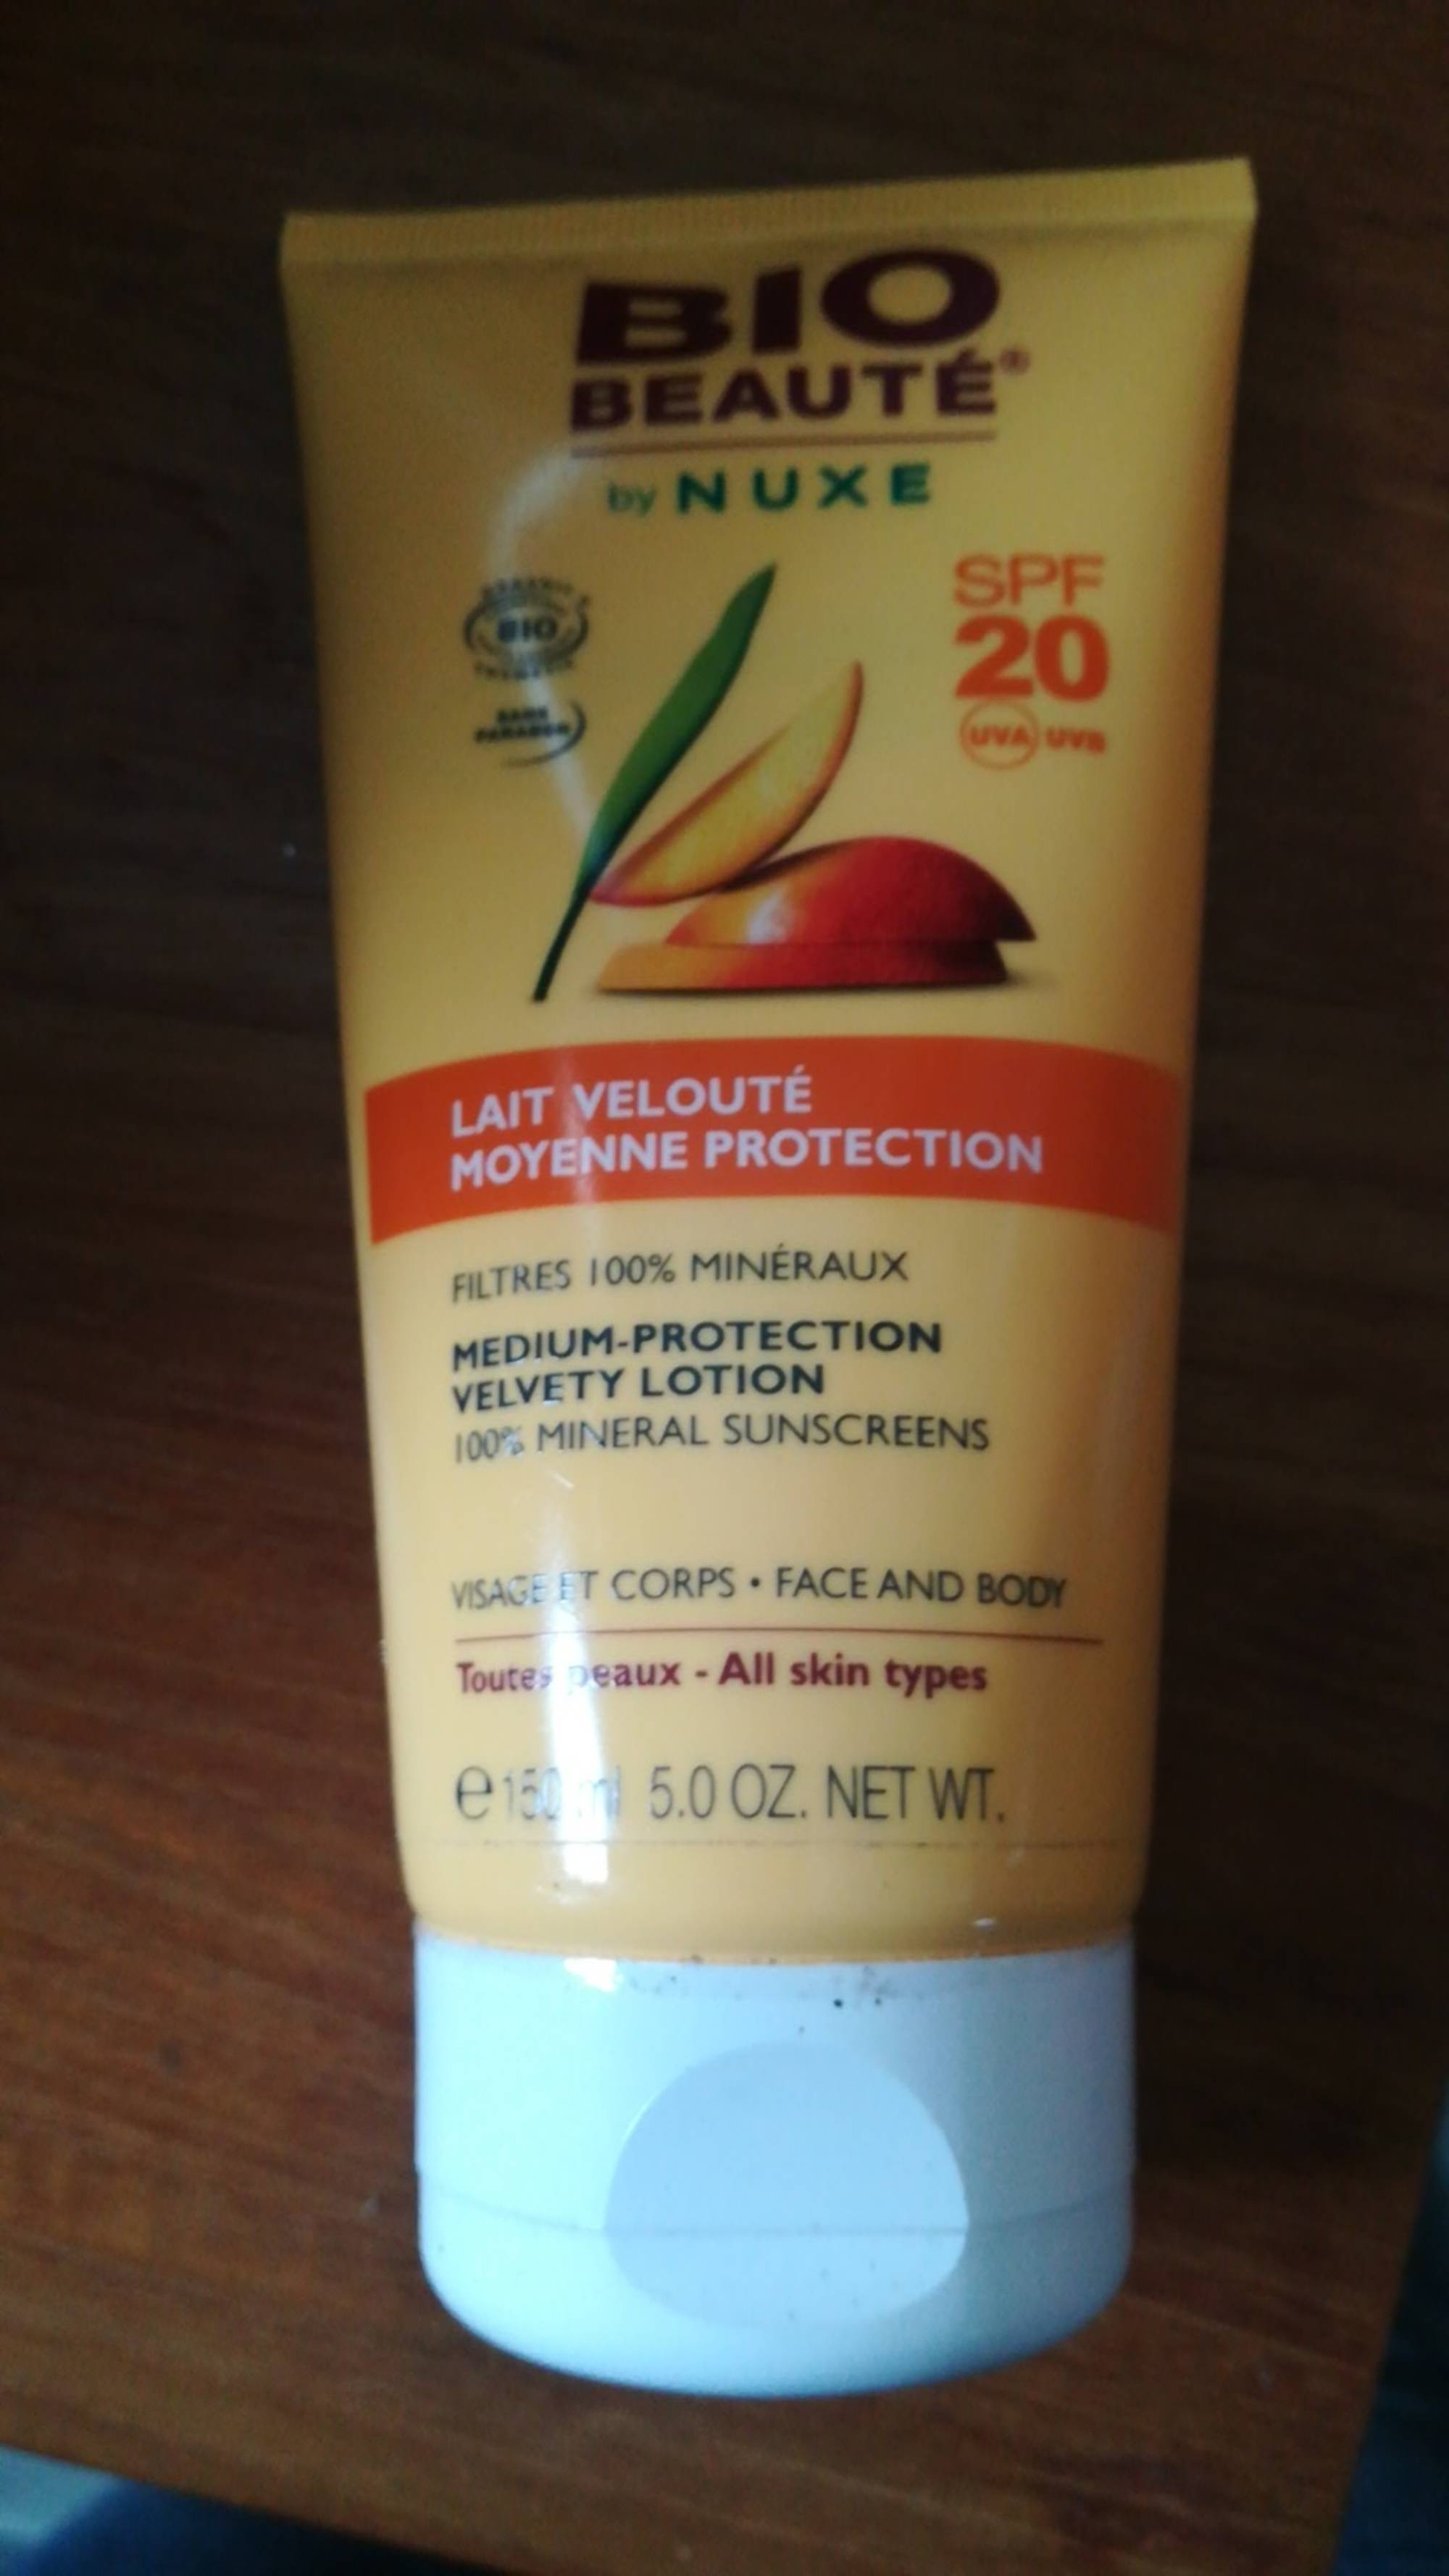 BIO BAUTÉ BY NUXE - SPF 20 UVA UVB - Lait velouté moyenne protection